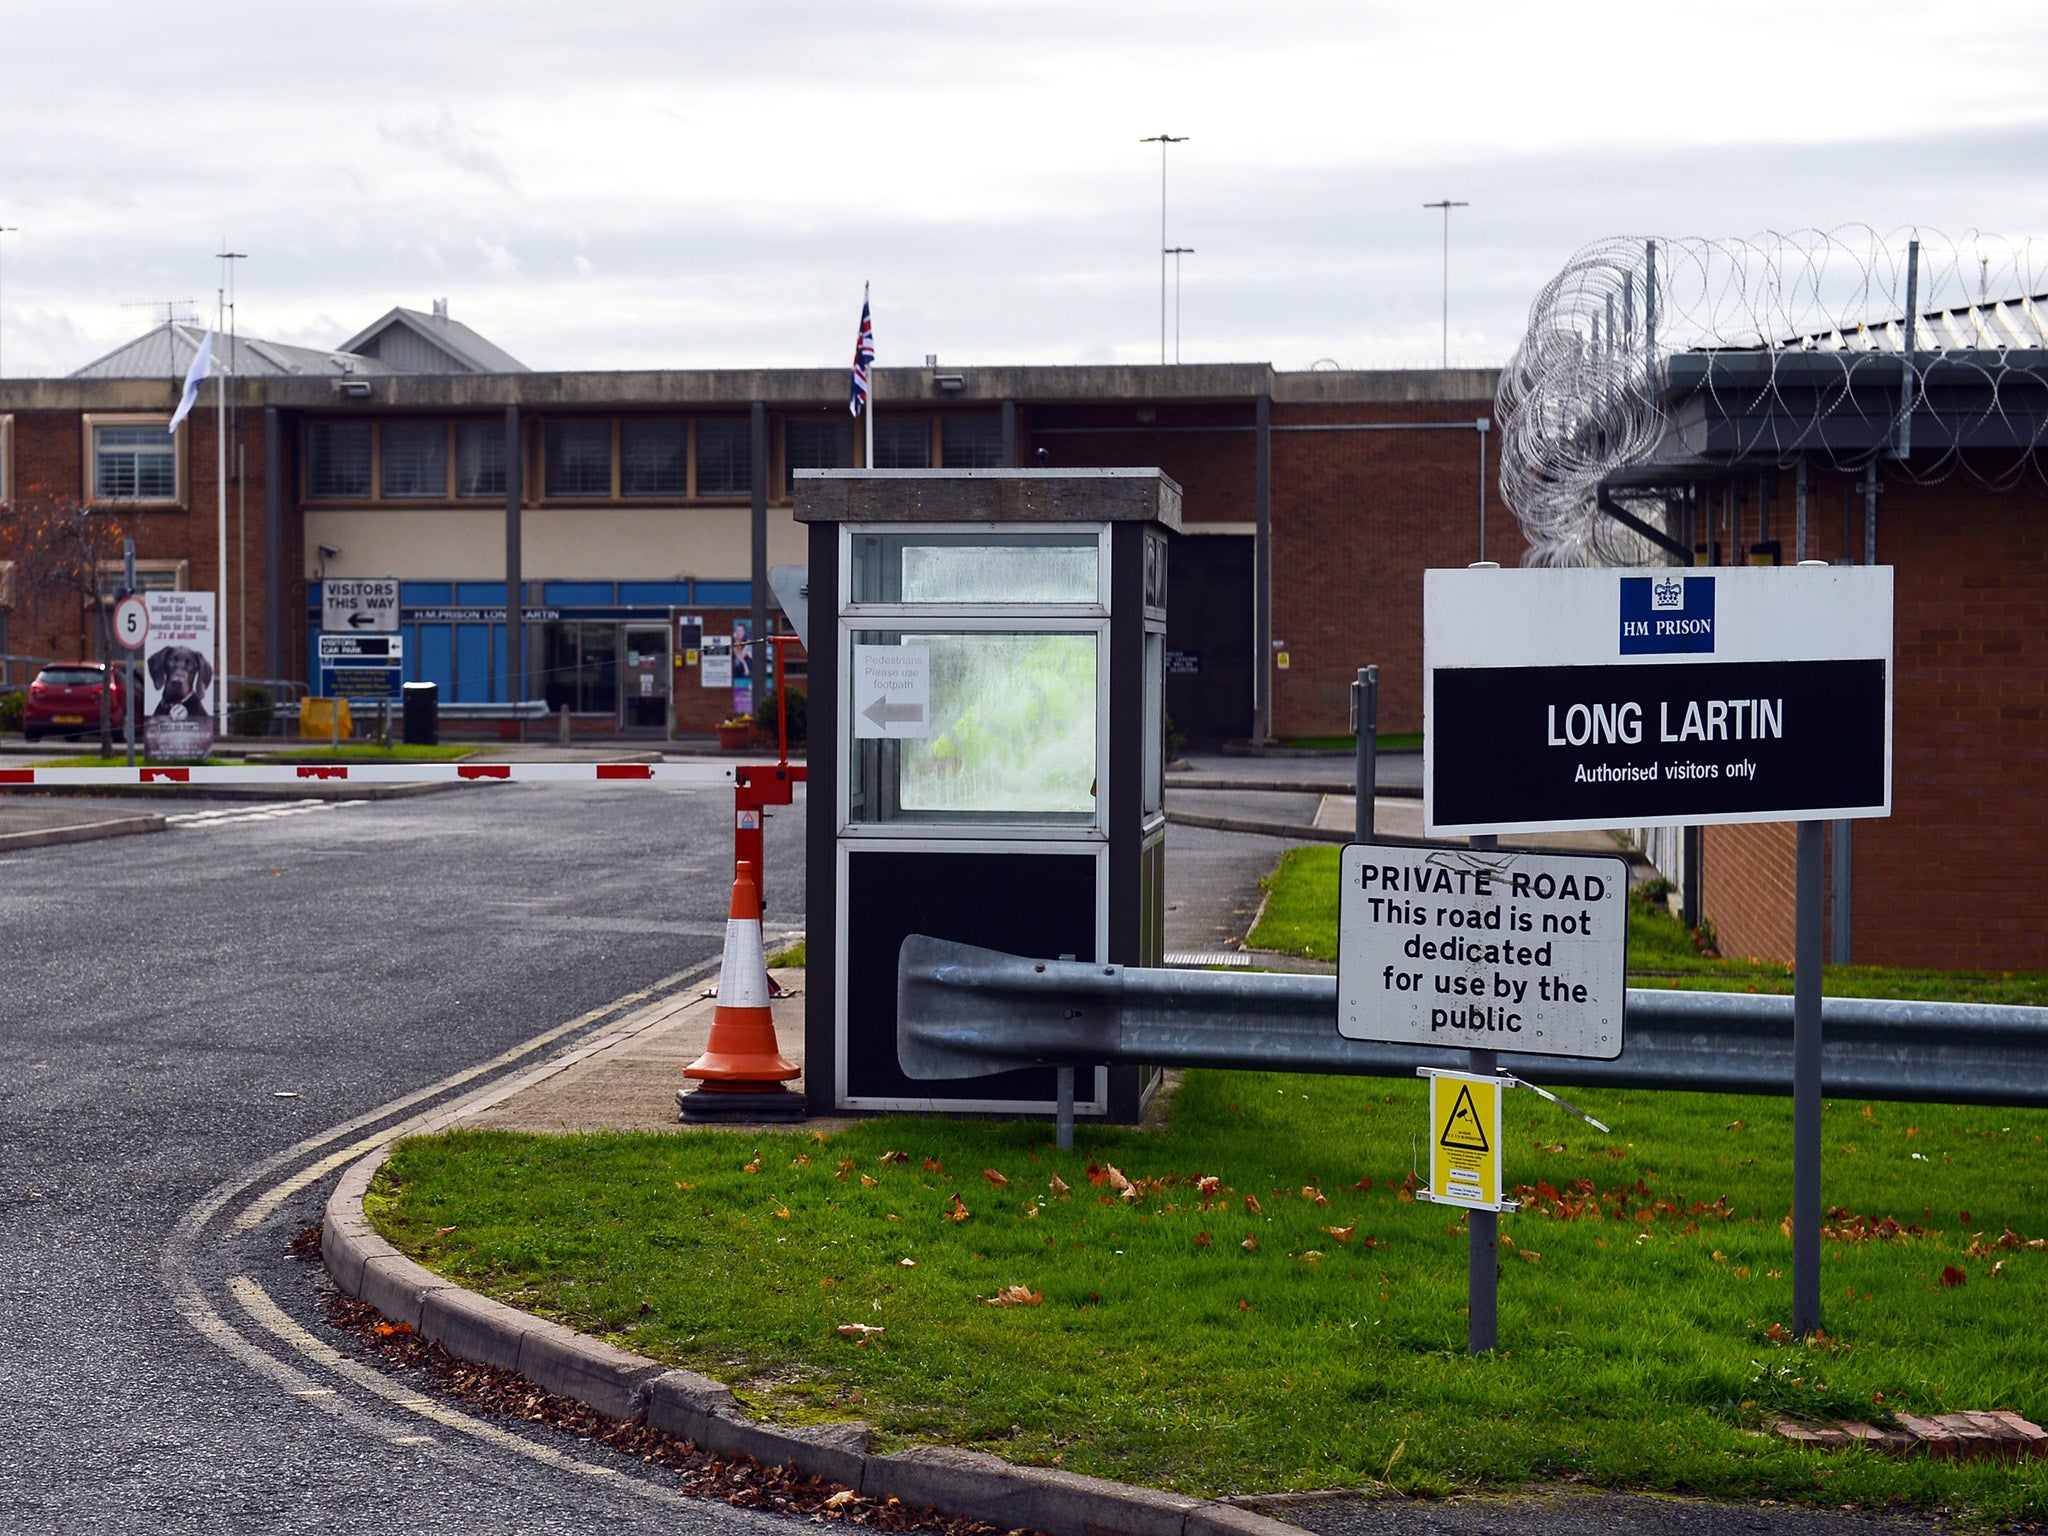 A drone was recently spotted over HMP Long Lartin in Worcestershire (Getty)